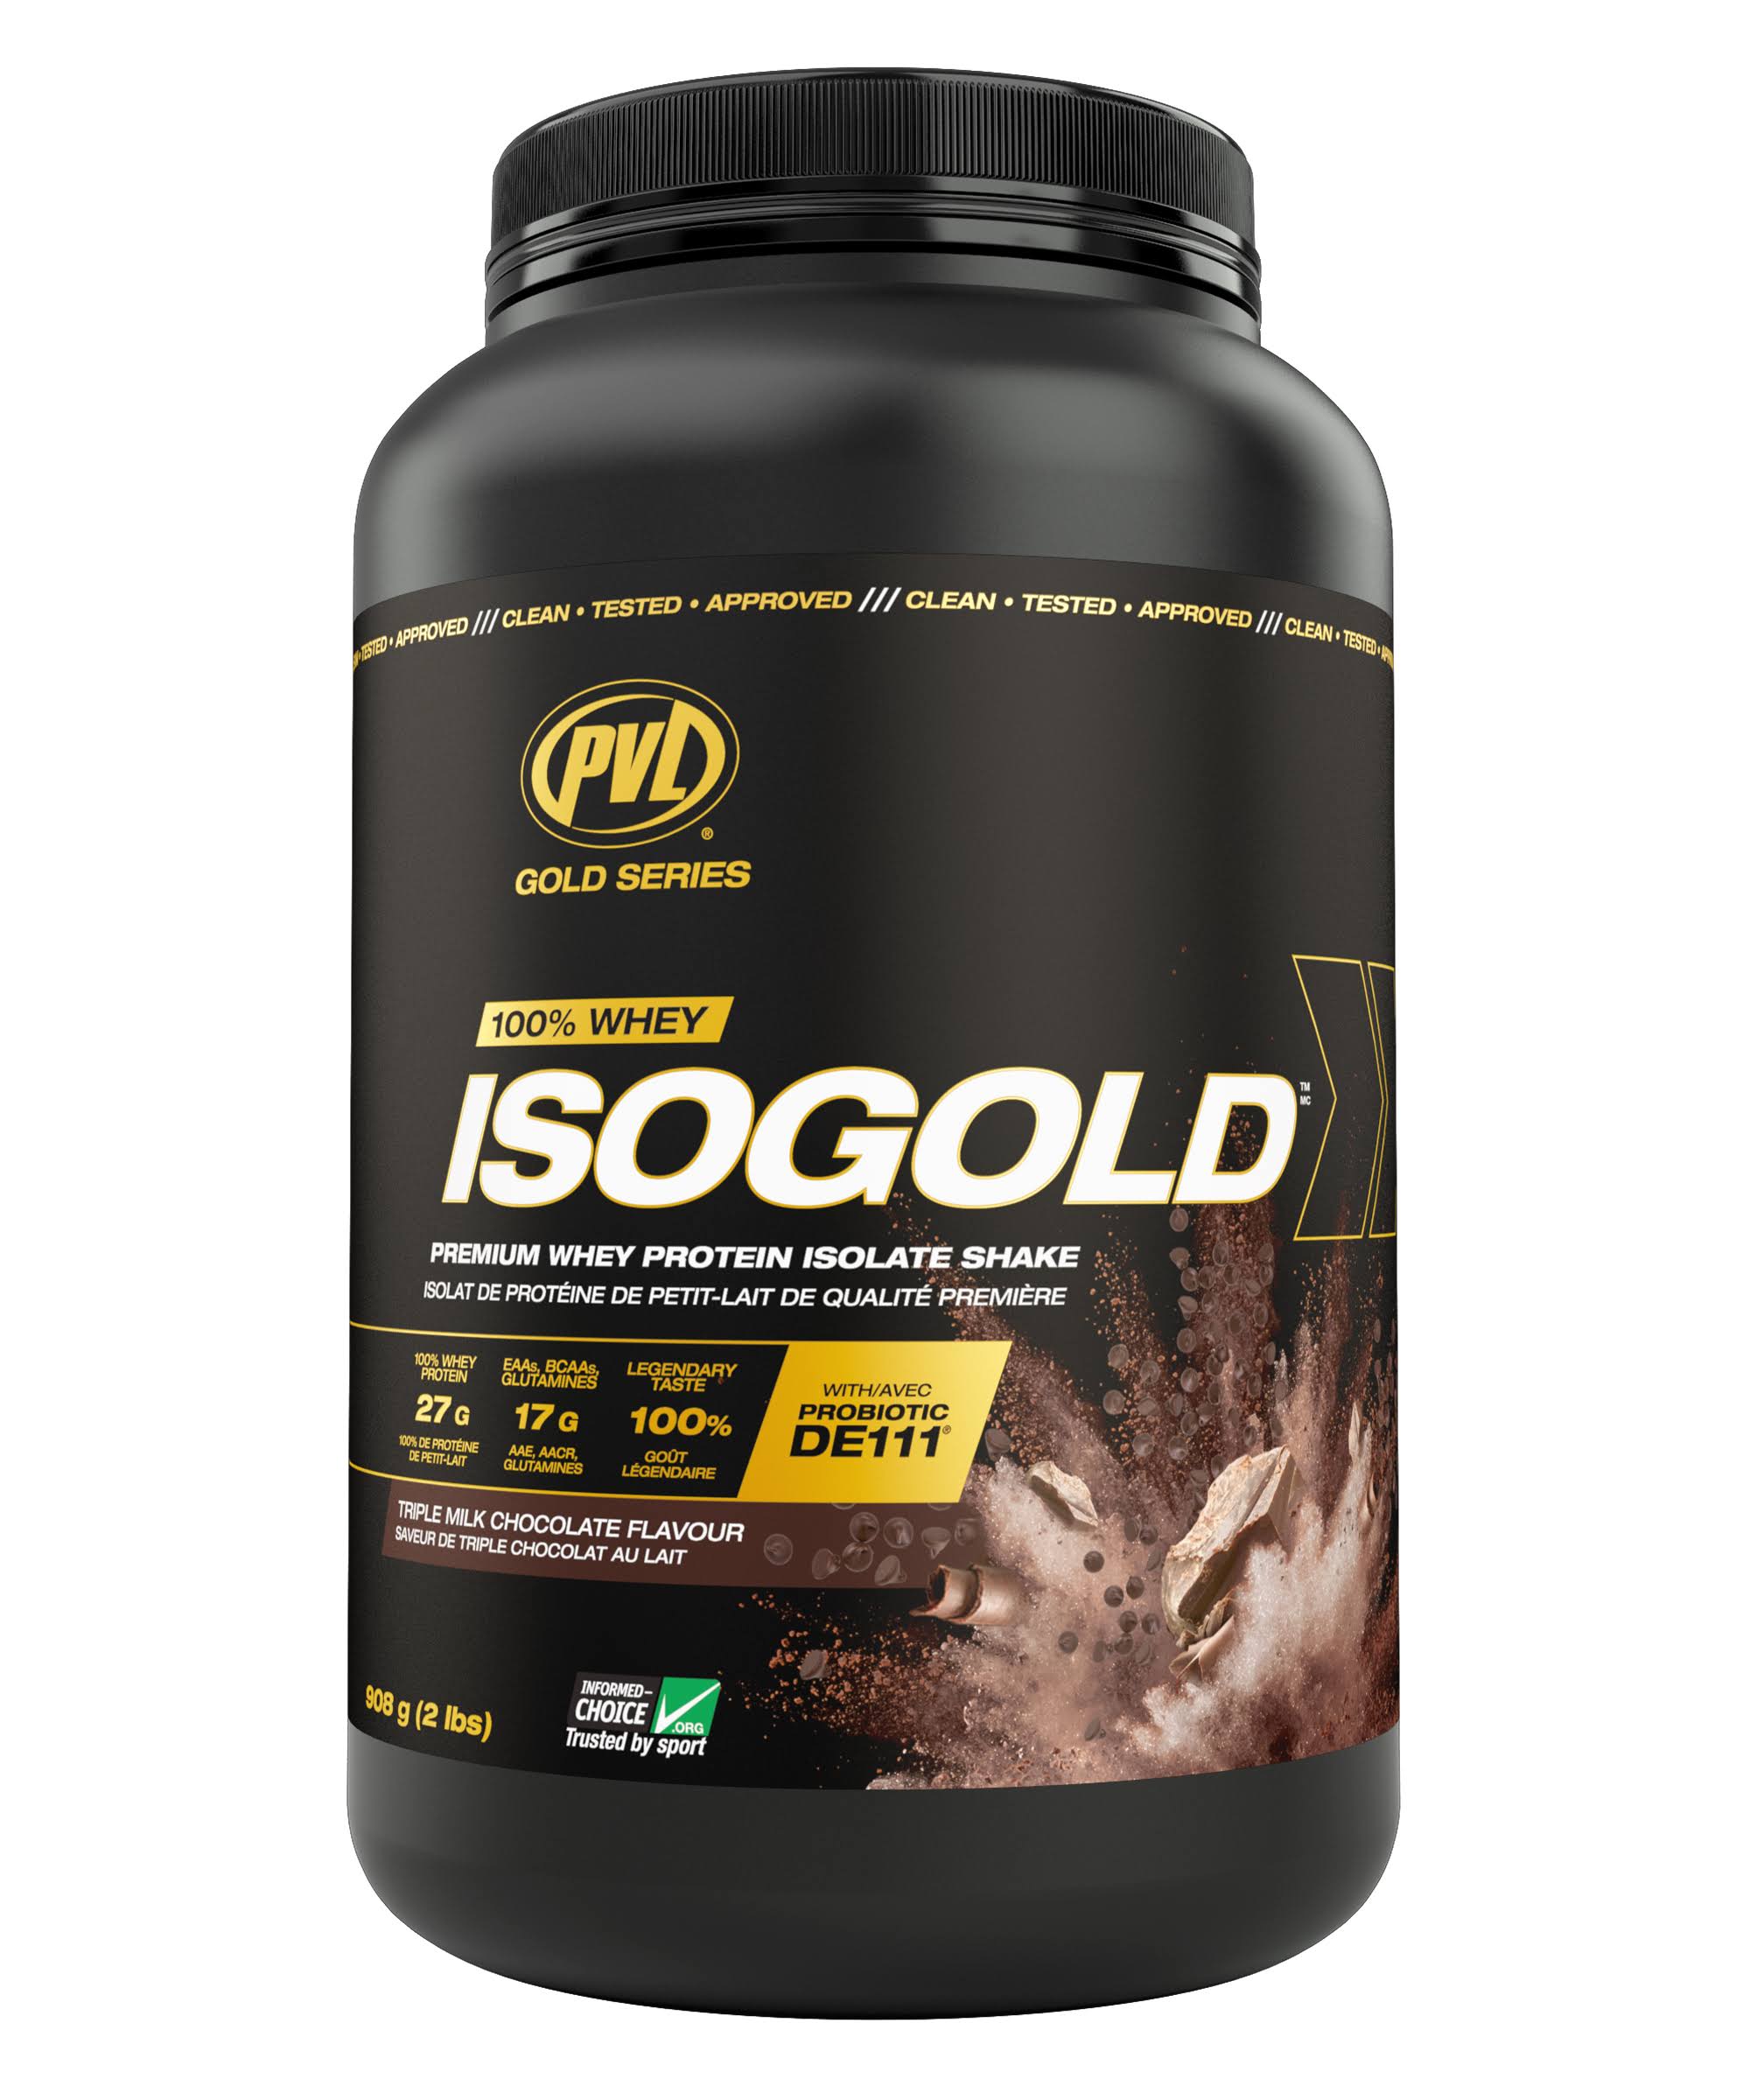 PVL Iso-gold Extra Premium Whey Protein Isolate - 900g